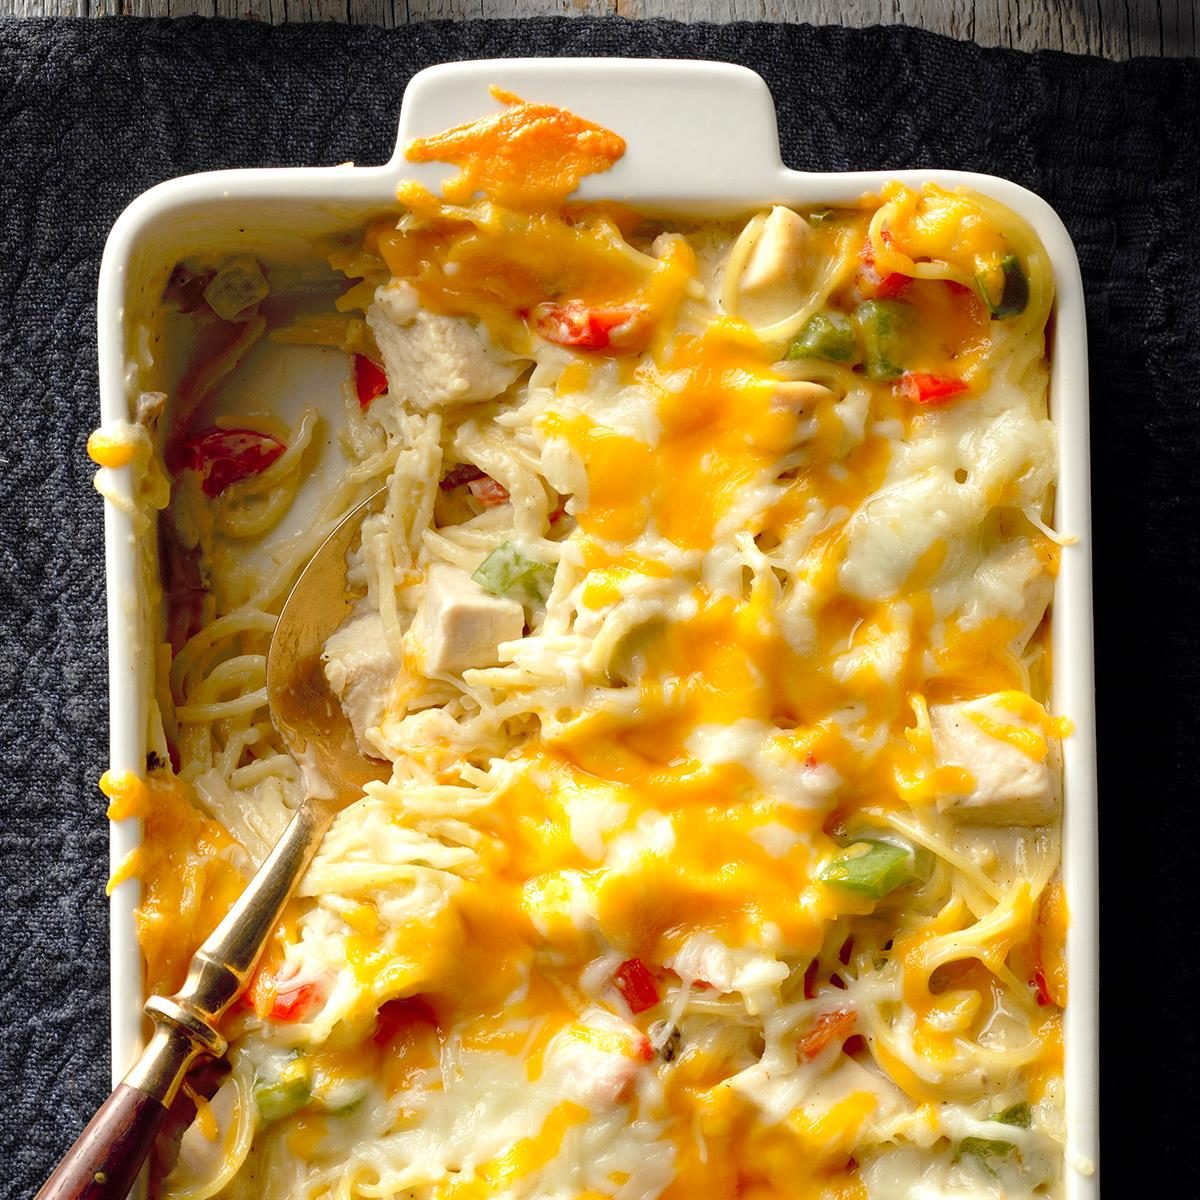 Day 23: Chicken & Cheese Noodle Bake